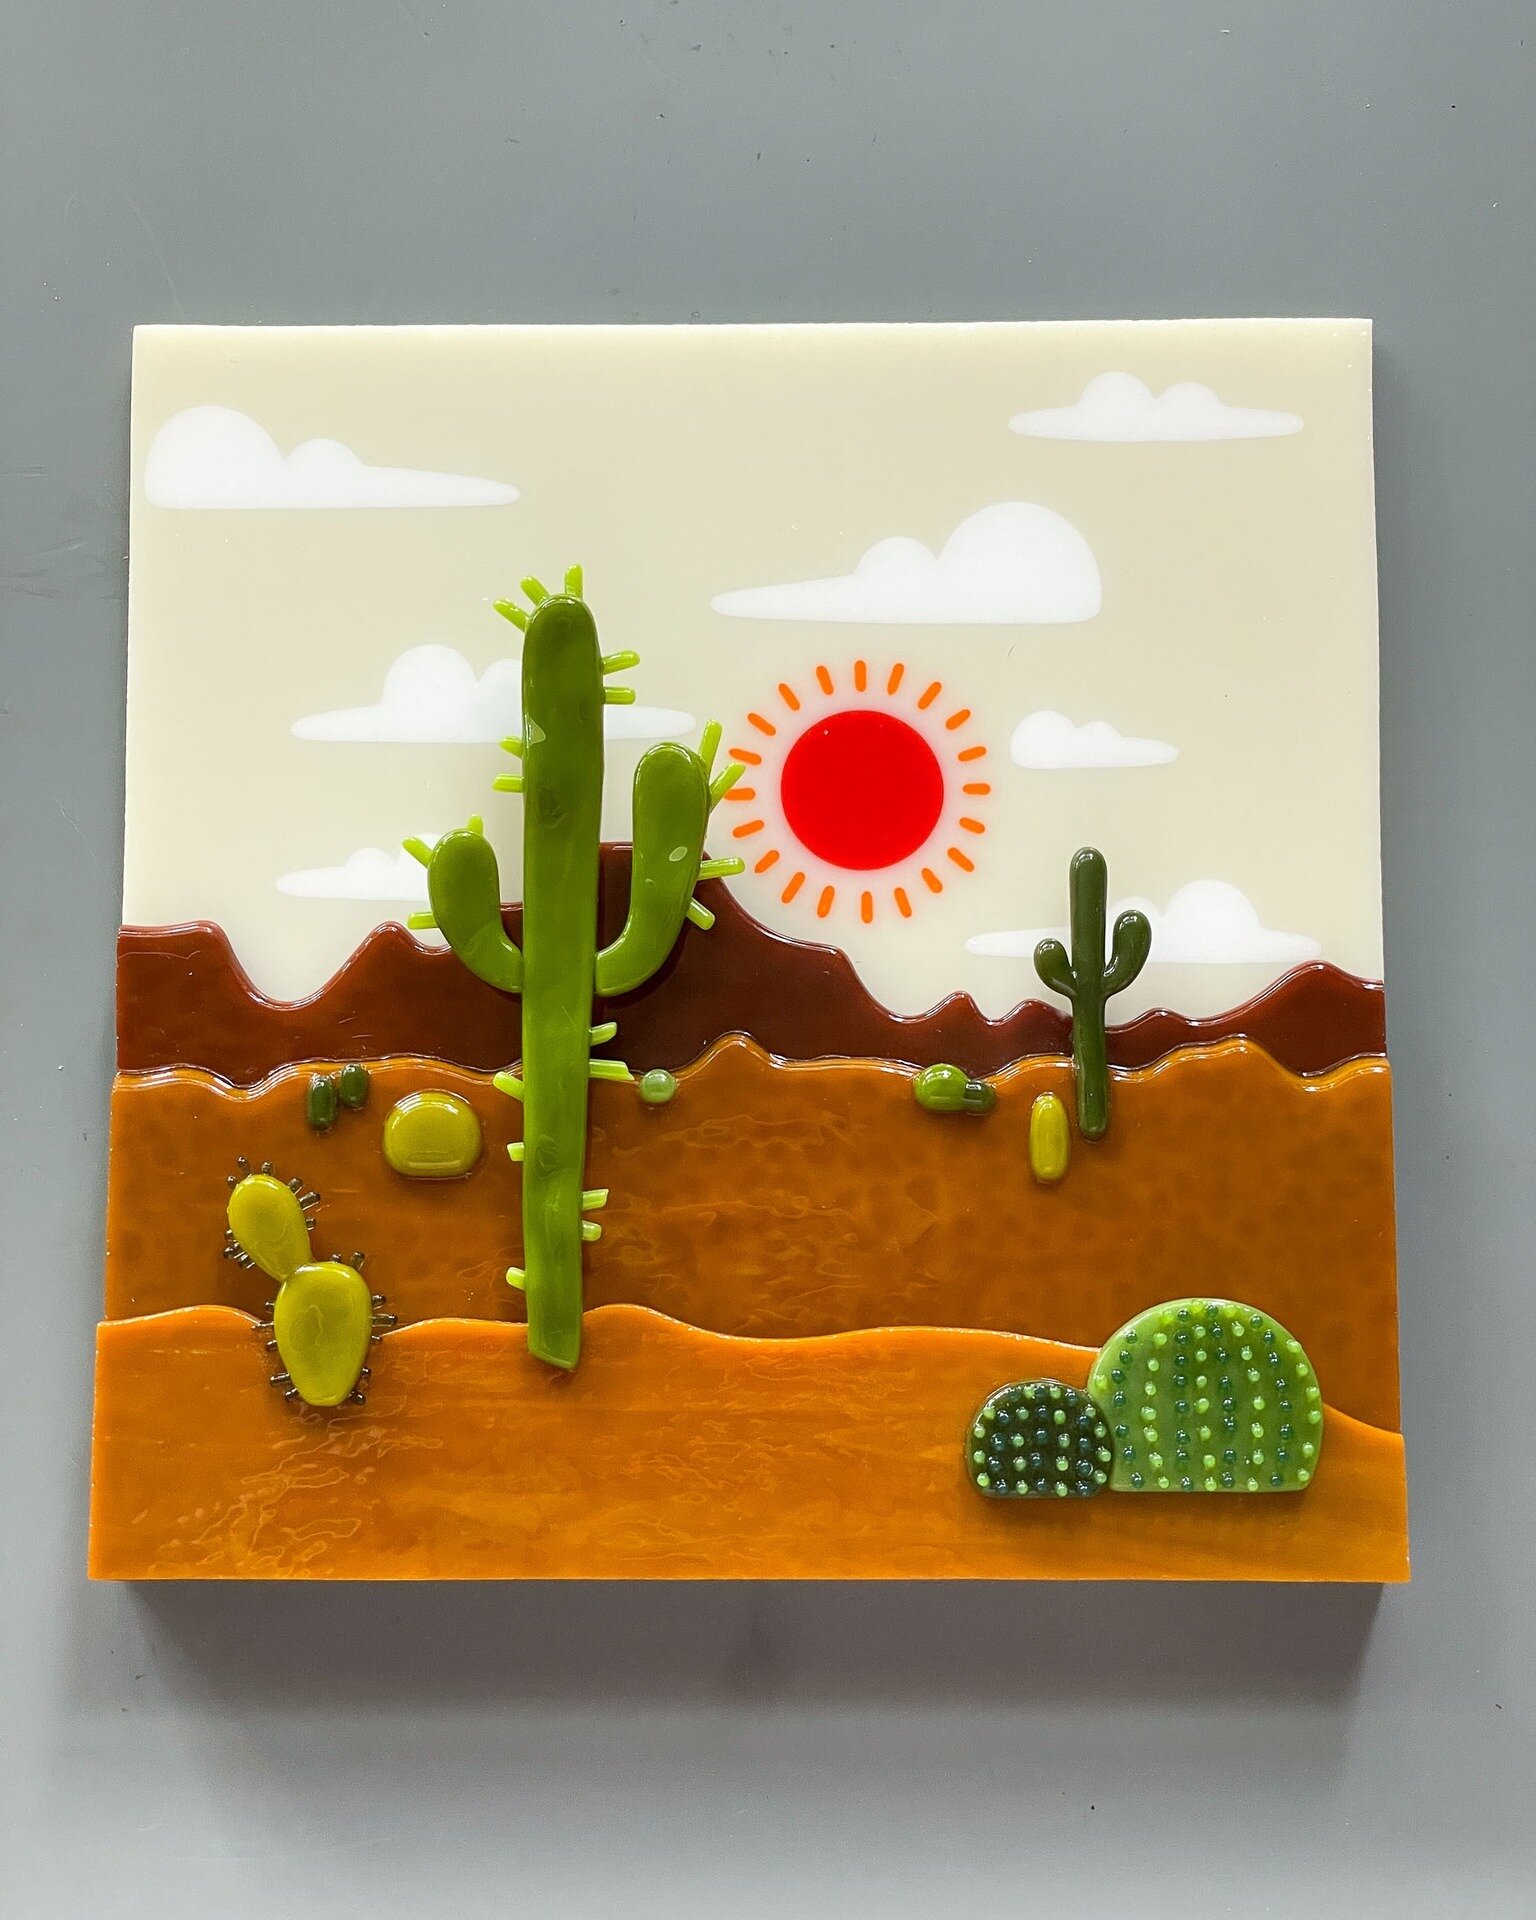 Not yet its final form, but a nice preview of this little world I've been building.⁣⁣⁣⁣
⁣⁣⁣⁣
The latest entry in my Studio Journal shares the creation process of the foreground layer, down to every teeny tiny cacti spike. Go see for yourself 👉🏻 lin